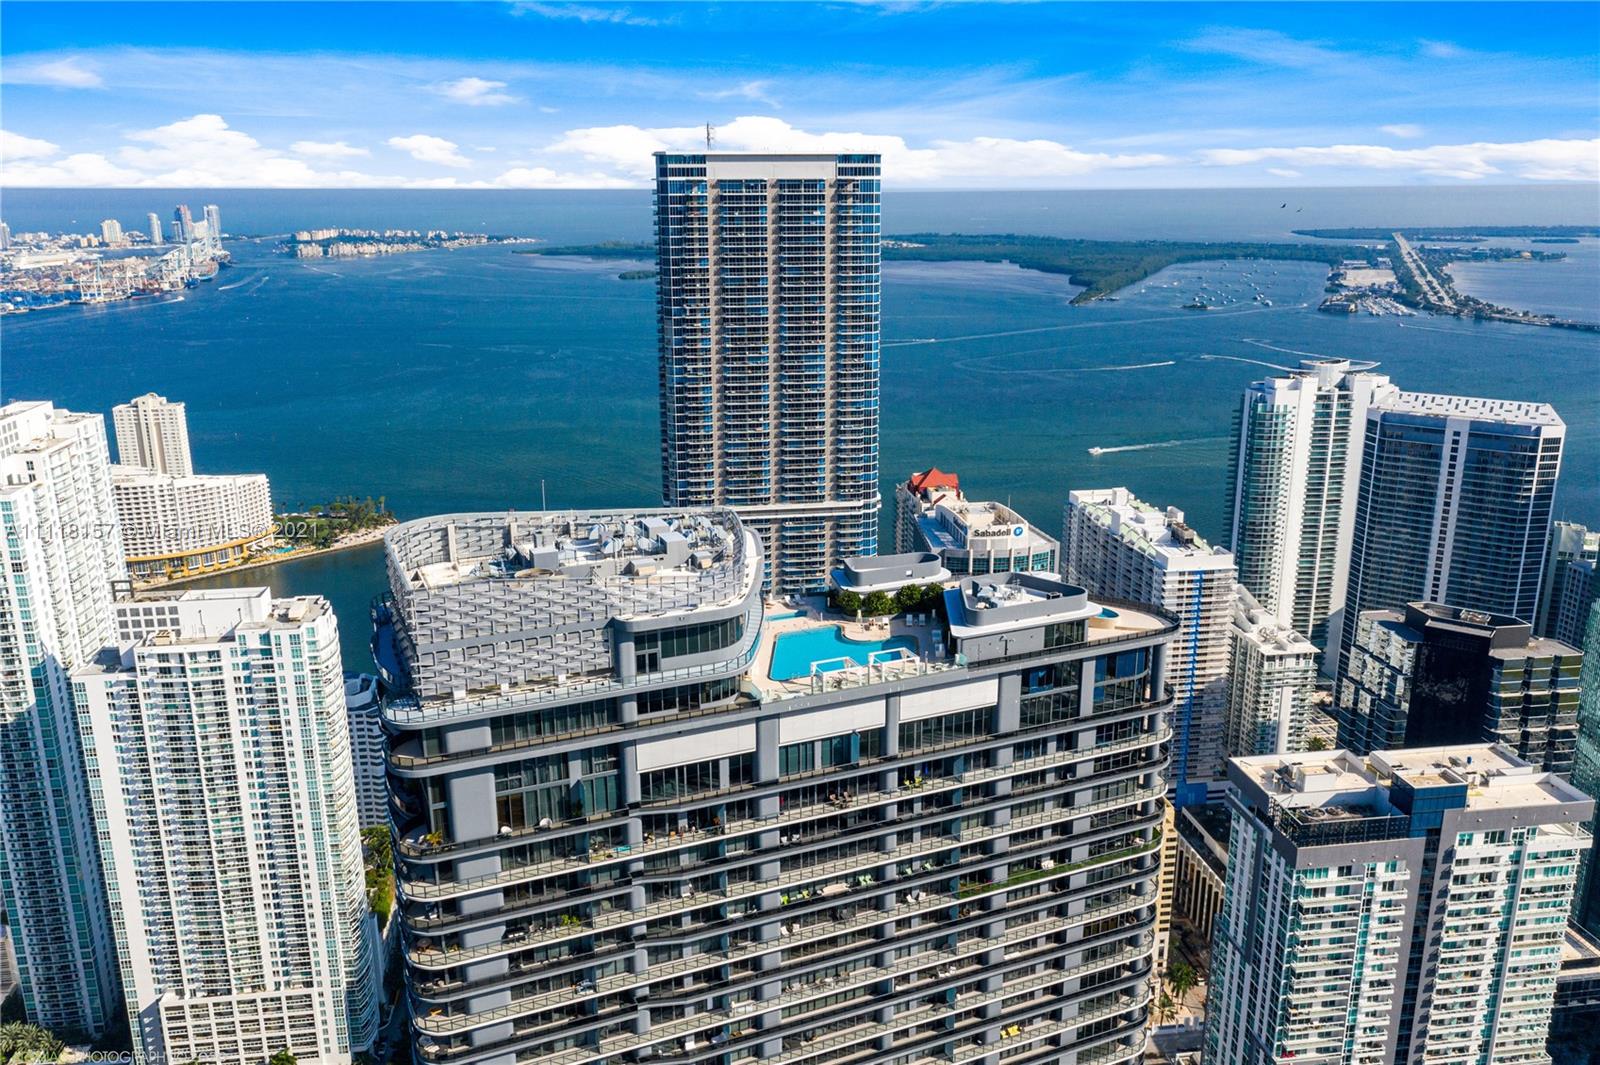 Brickell Flatiron Penthouse. Unobstructed panoramic views with SE Exposure [Best line] Corner unit with wrap around balconies throughout. 3 Beds- 3.5 Baths with 1,955 SQFT of living area, 10 ft. ceilings, floor to ceiling impact windows and sliding doors, Italian Snaidero Kitchens and Bathrooms, built-out closets, Miele appliances, and other luxury finishes. Full-service building with concierge service and resort style amenities includes the 64th Floor Sky Club, a spa, gym, theater, and lap pool, club room, lounge room, movie theater & Billiards. Two assigned parking space and valet service. Fantastic location in the heart of Brickell. Vacant turn-key unit easy to show.